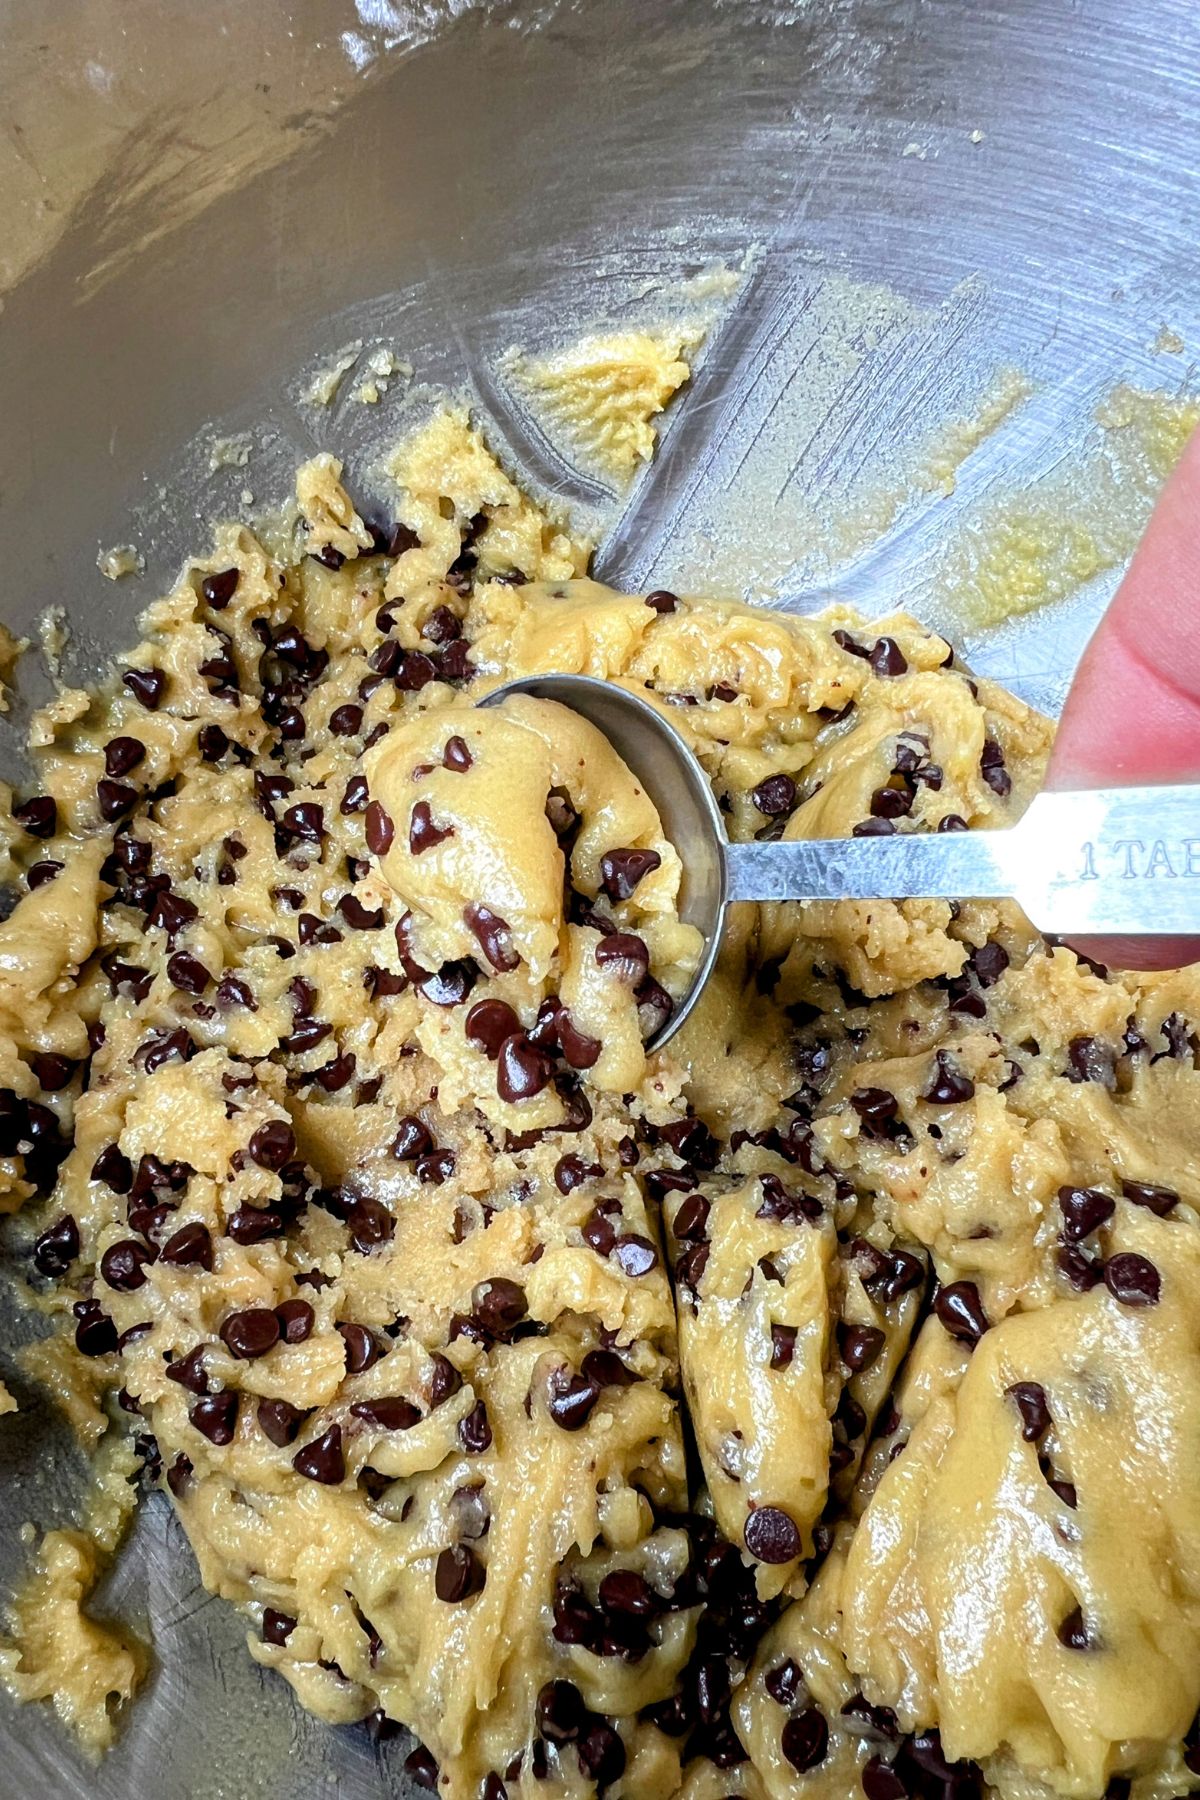 Spoonful of no butter chocolate chip cookie dough.